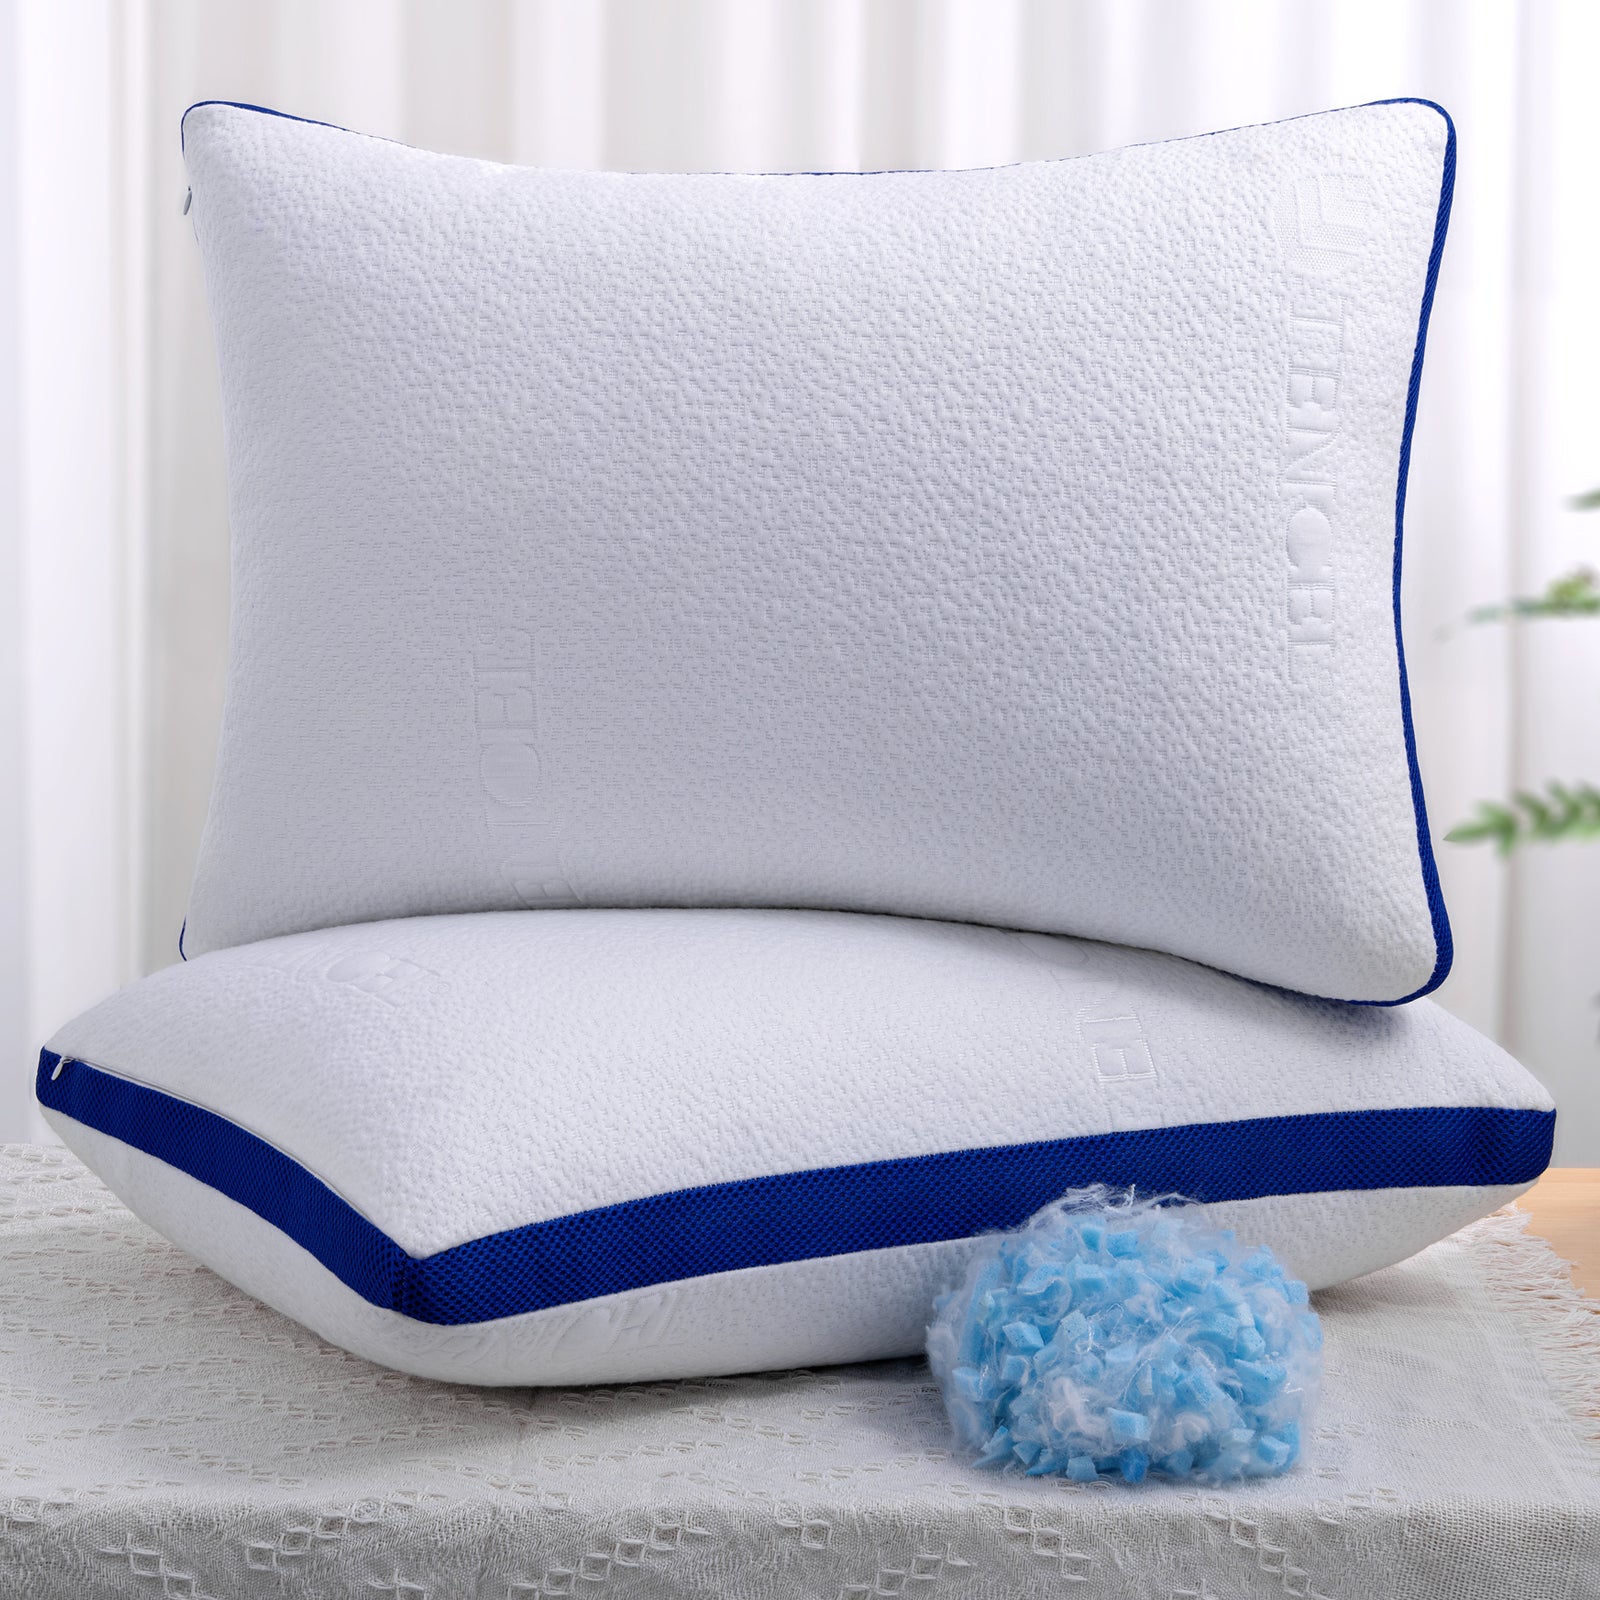 Cooling Gel Bed Pillows for Queen Size - Set of 2 - France